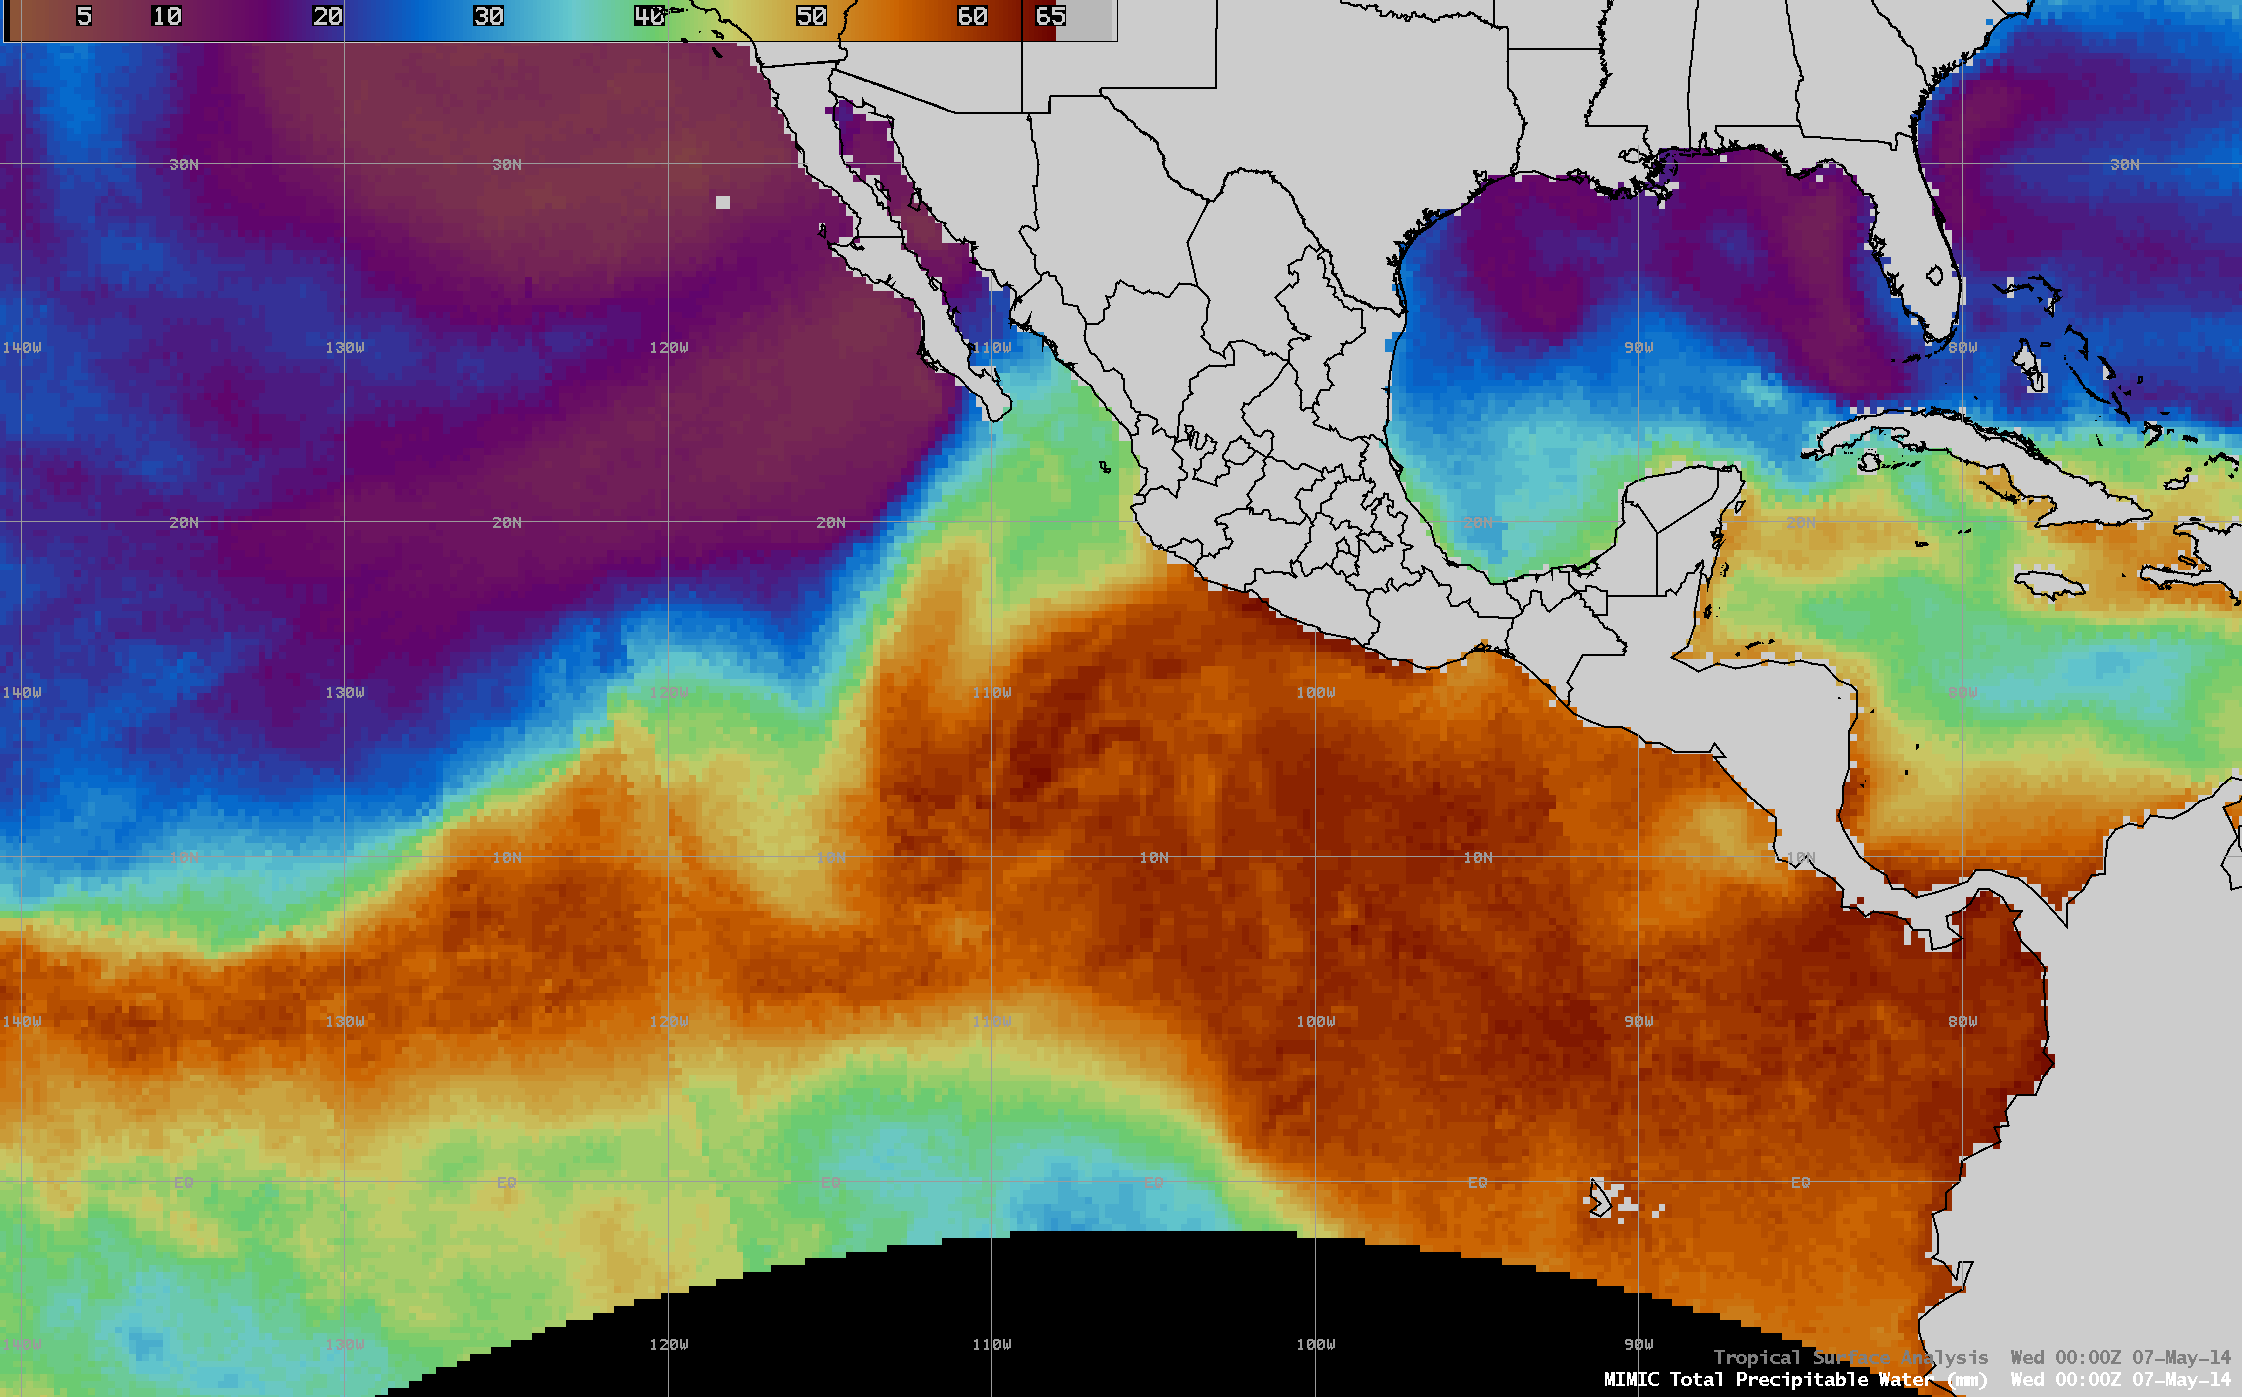 MIMIC Total Precipitable Water product (click to play animation)